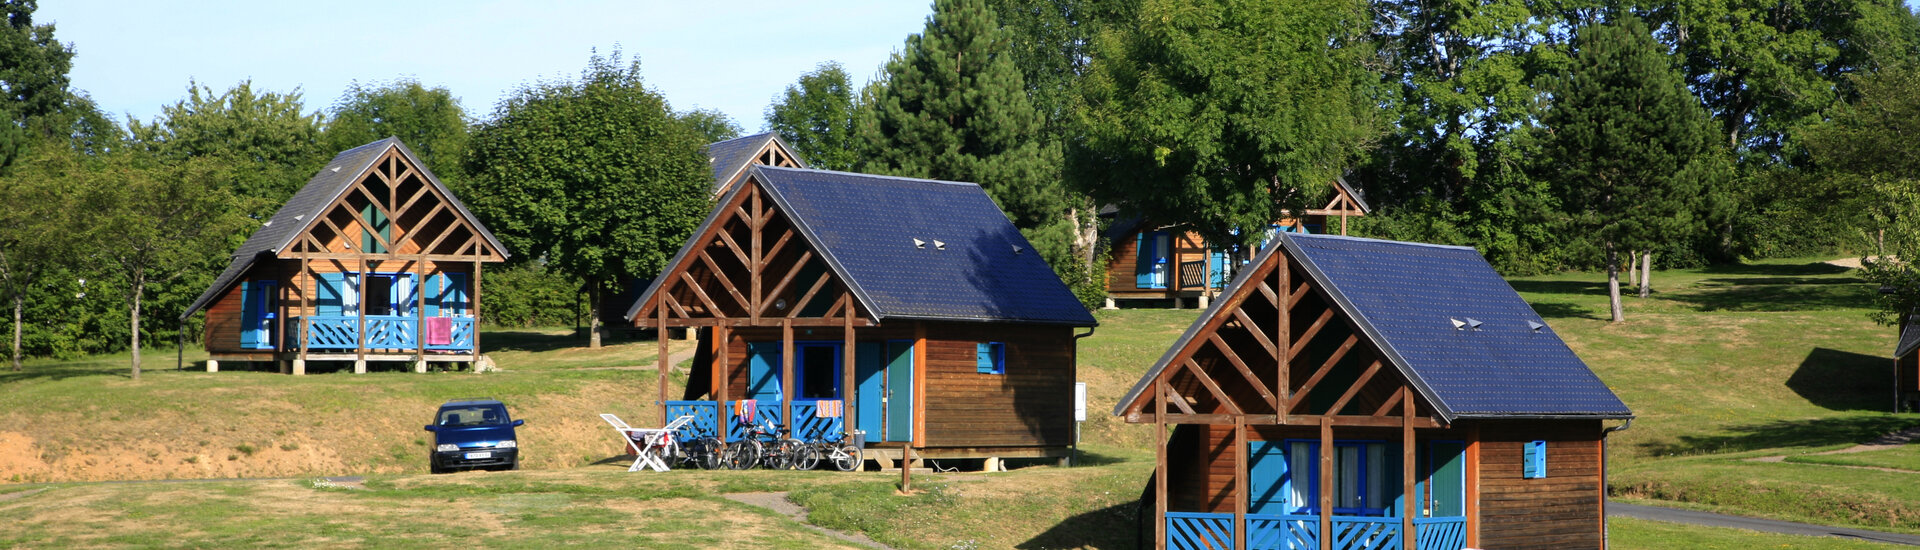 Location chalets Camping Val st jean - Cantal